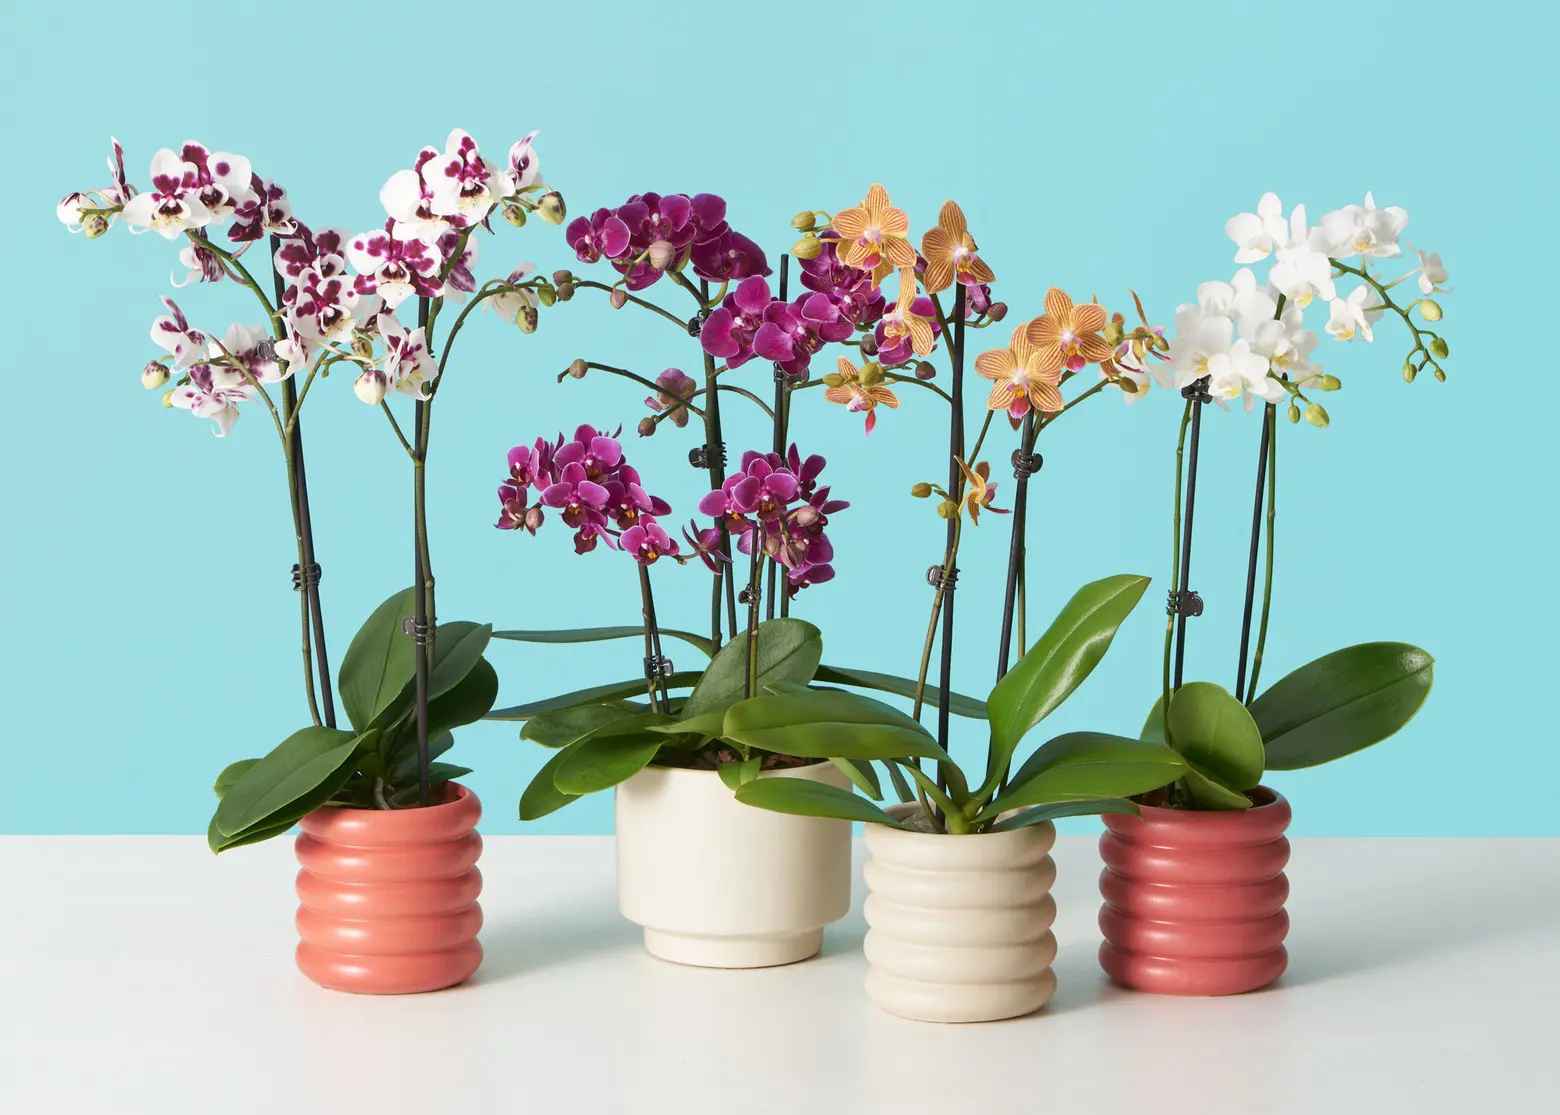 12 flowering houseplants to brighten up your home